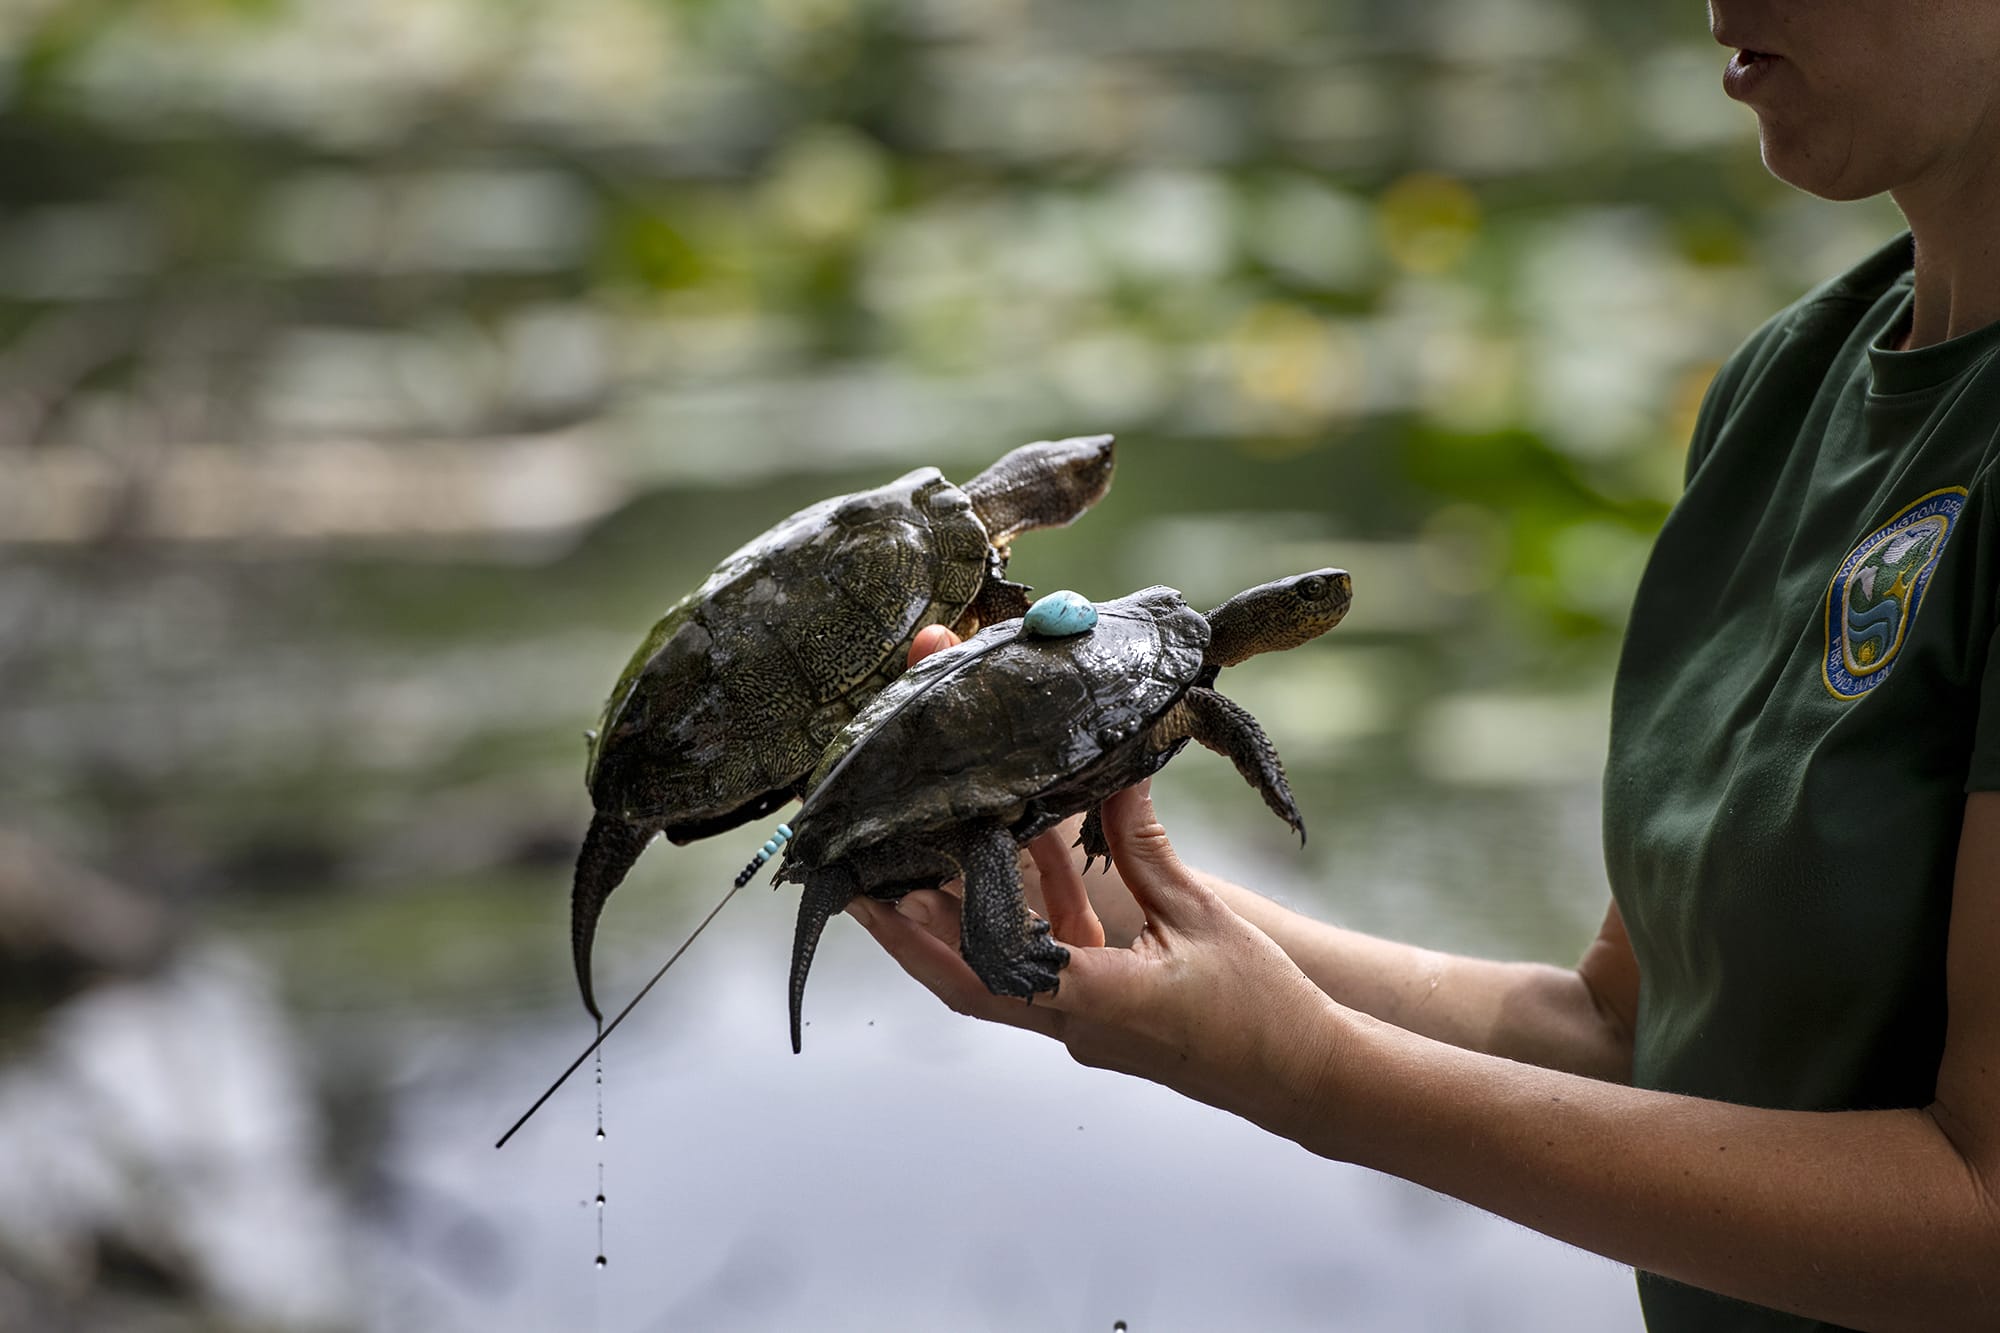 District Wildlife Biologist Stefanie Bergh examines two western pond turtles at a research site in Klickitat County on Tuesday morning, July 9, 2019.